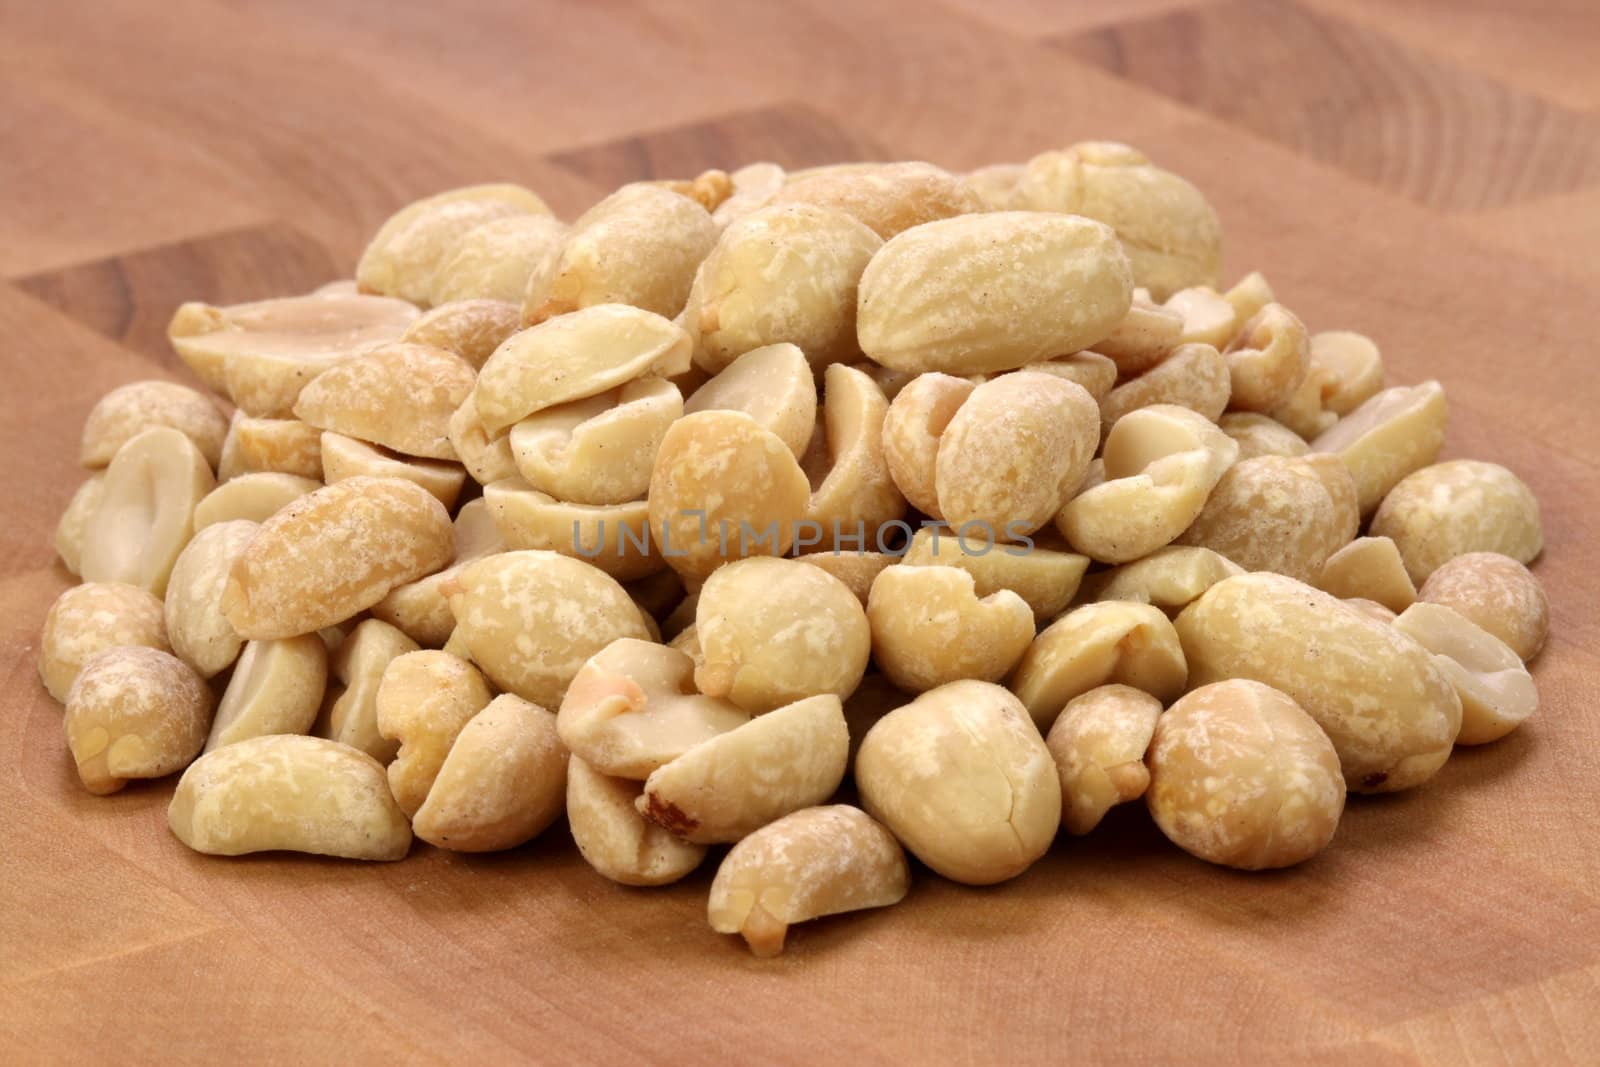 bunch of slow roasted peanuts, perfect amount of protein,carbs and healthy oils in a delicious edible